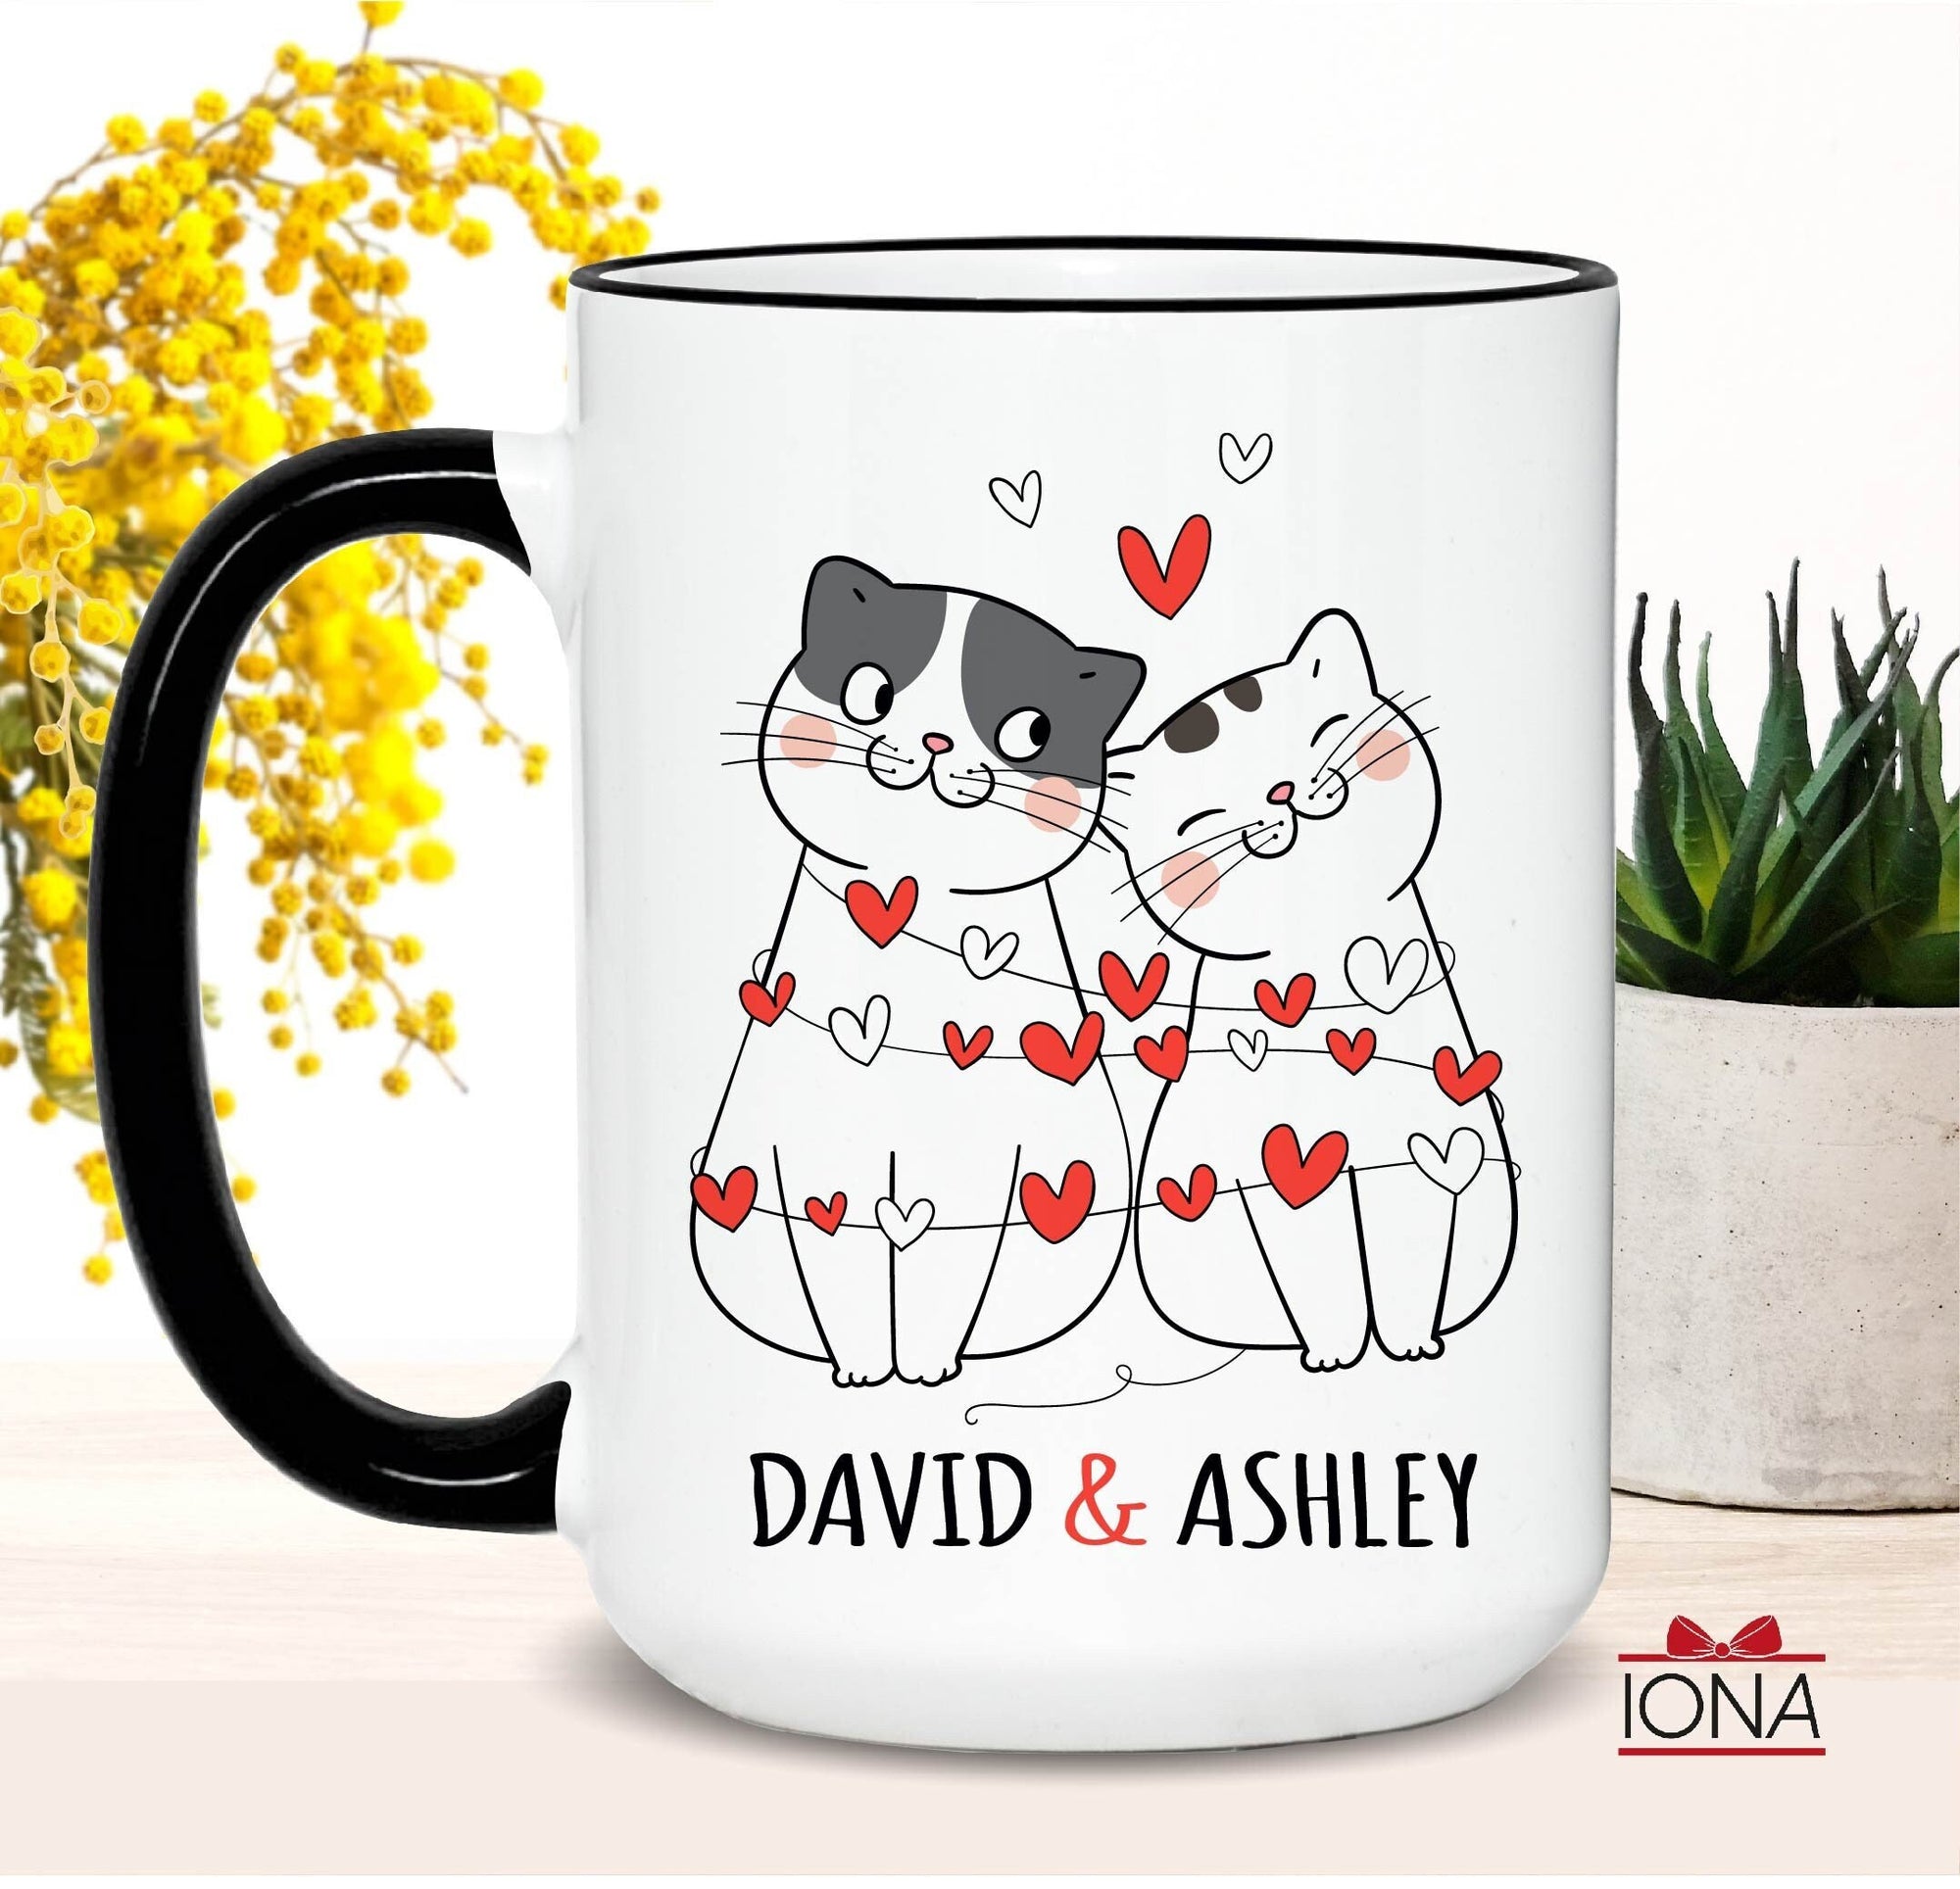 Valentines Day Coffee Mug, Couples Gift, Girlfriend Gifts, Romantic Gifts for Her,Cat Mug, Custom Couple gift,Couple Mug,Gift for him Couple